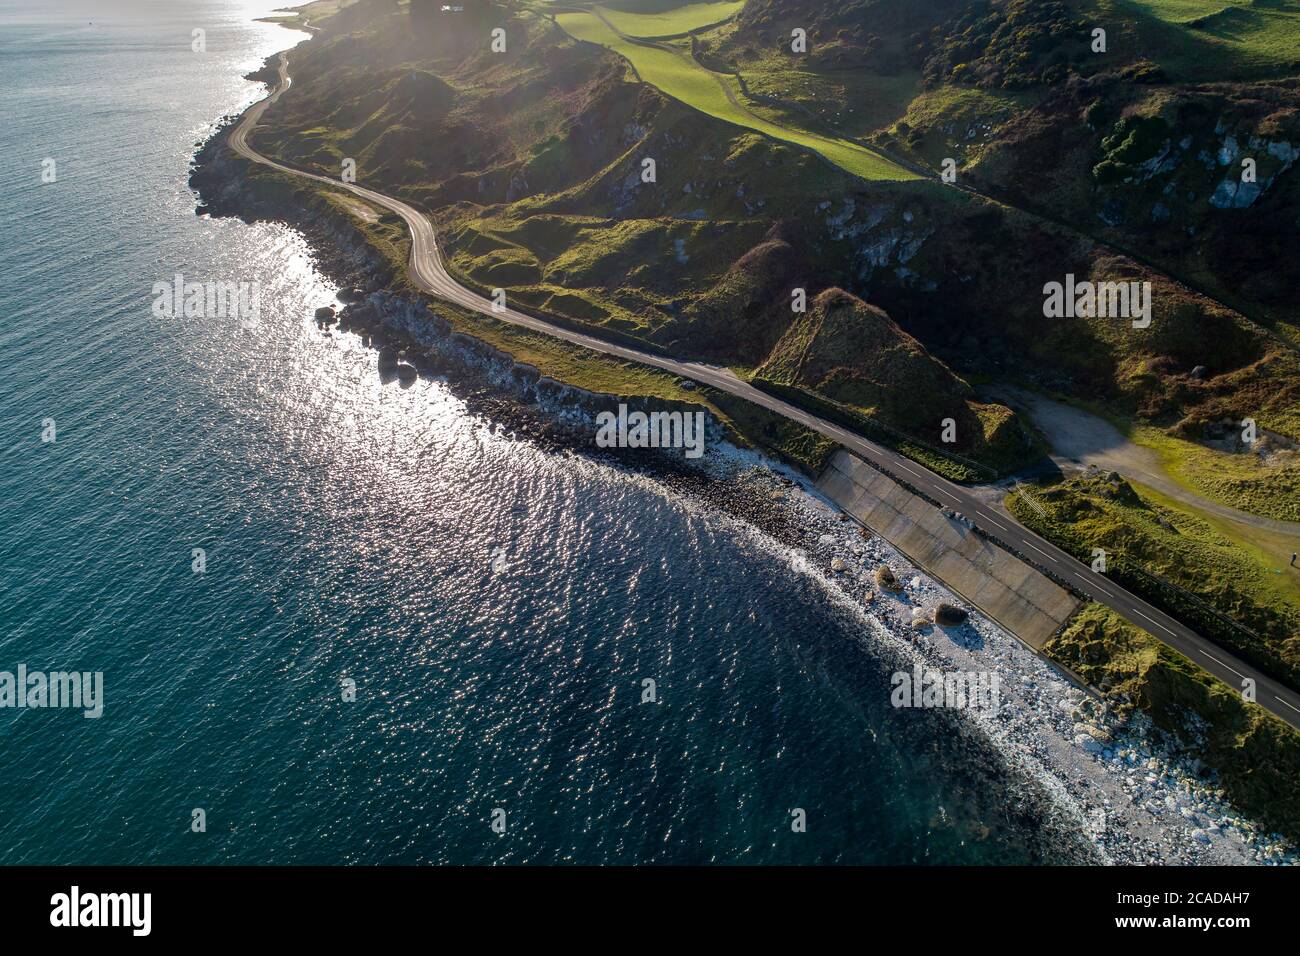 Causeway Coastal Route a.k.a Antrim Coast Road A2 on the Atlantic coast in Northern Ireland. One of the most scenic coastal roads in Europe. Aerial vi Stock Photo